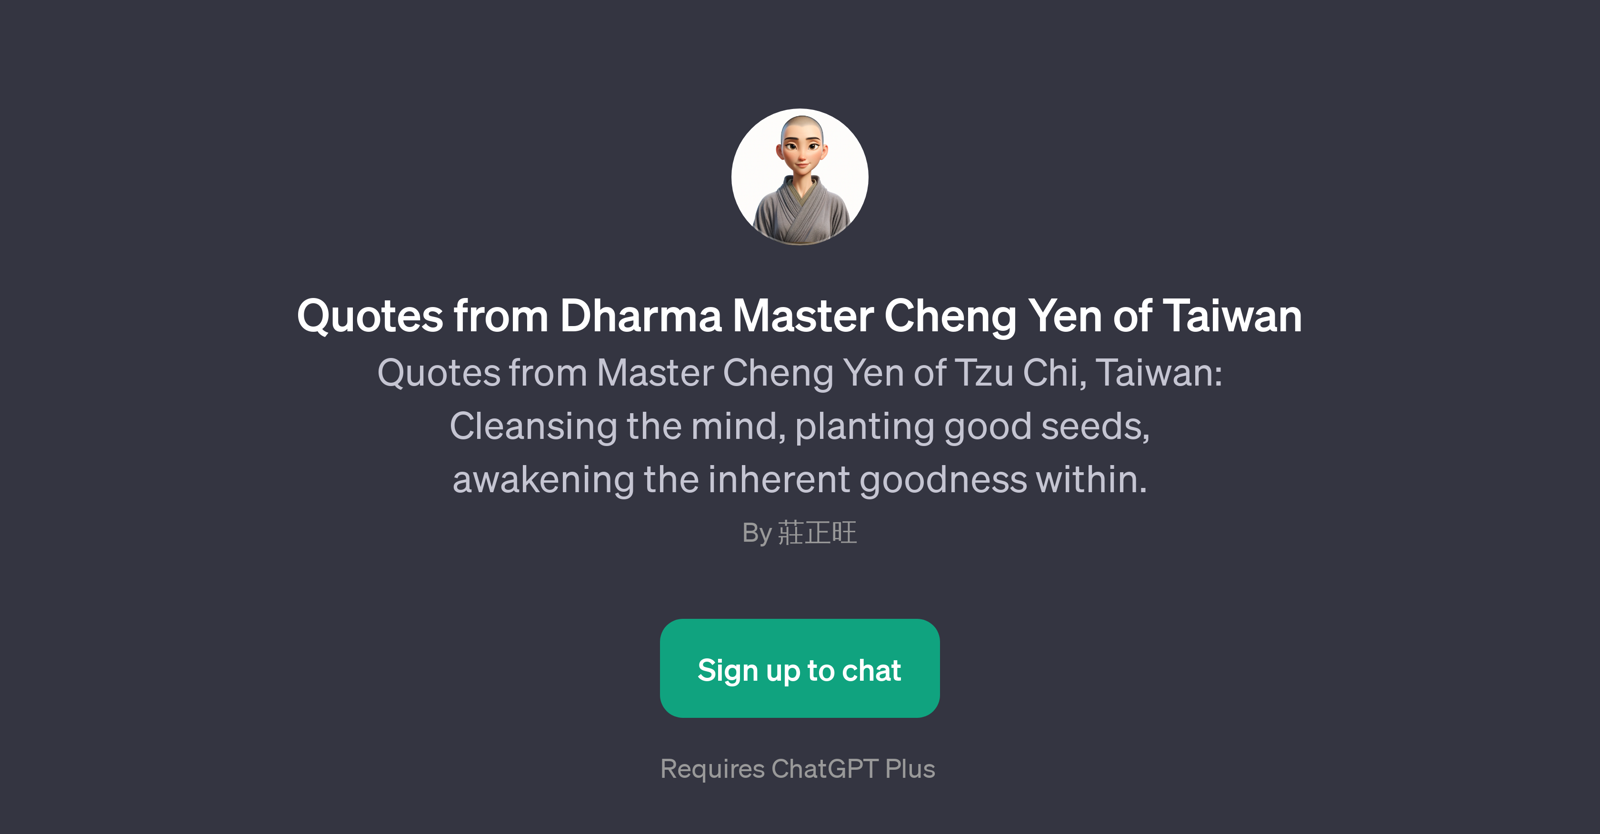 Quotes from Dharma Master Cheng Yen of Taiwan website